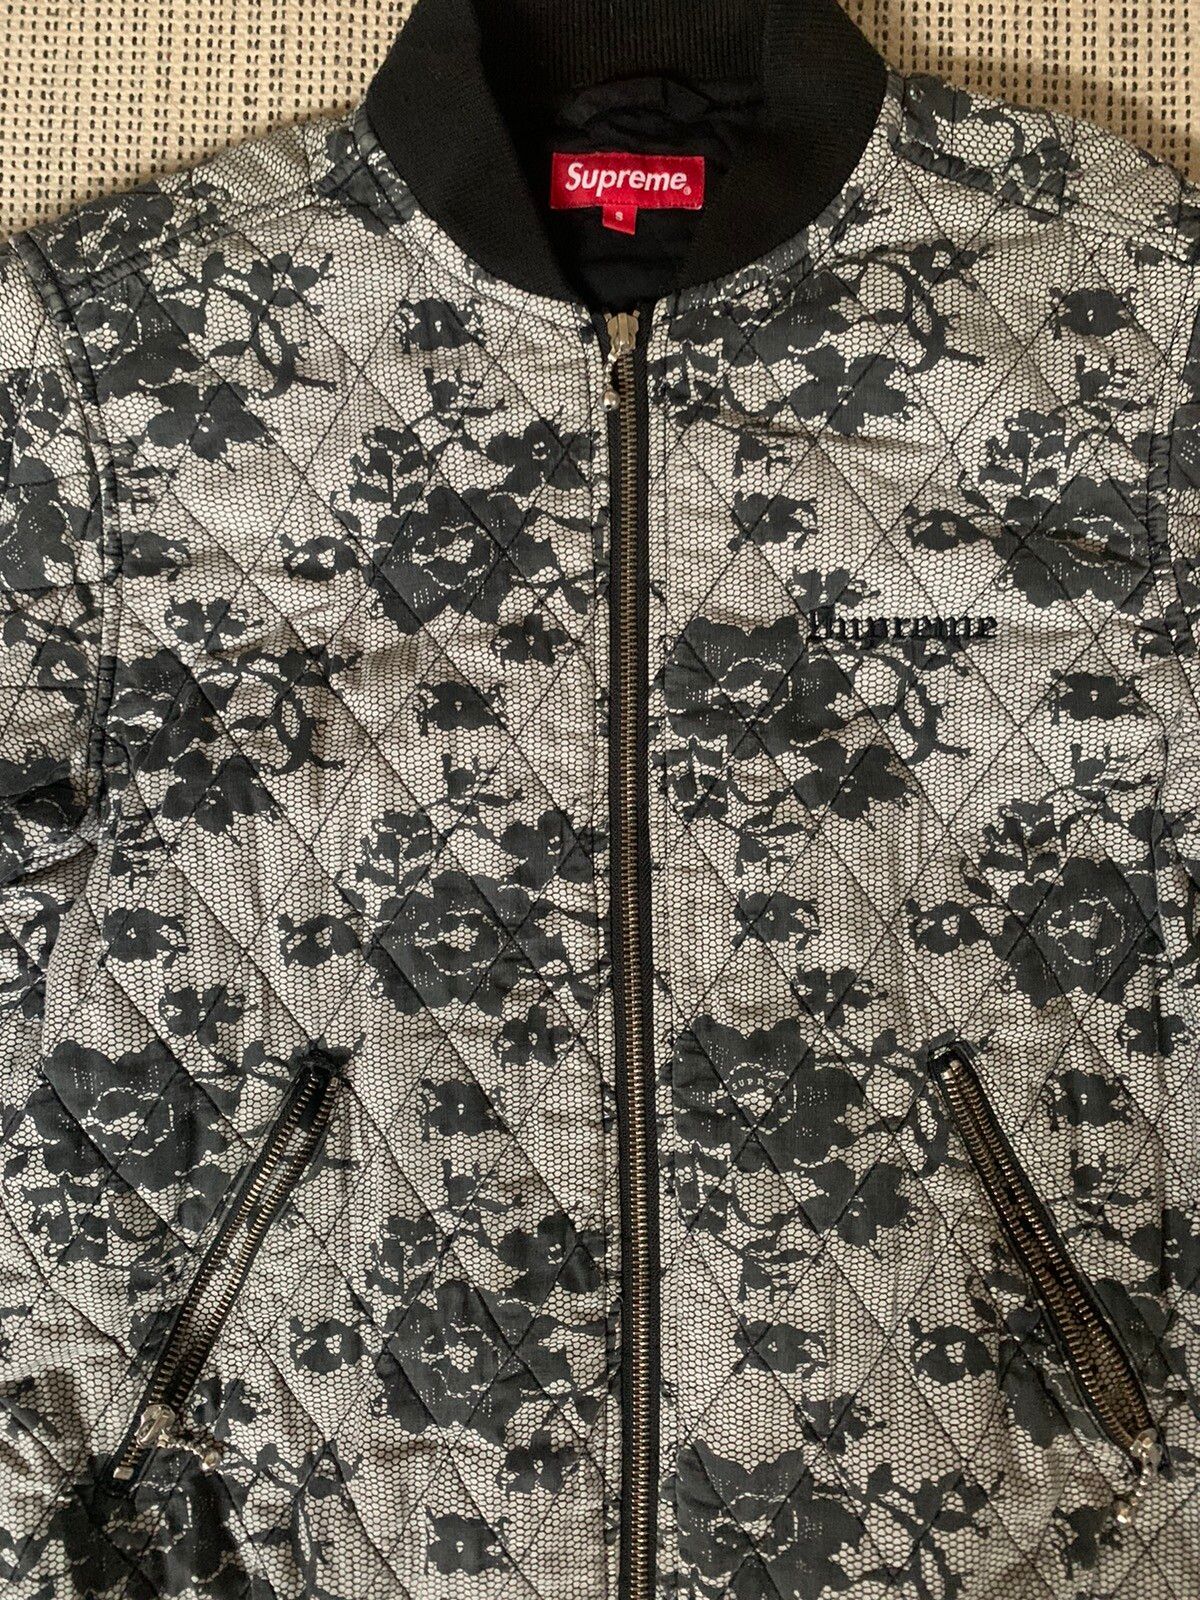 Supreme Supreme Quilted Lace Bomber Jacket Floral | Grailed